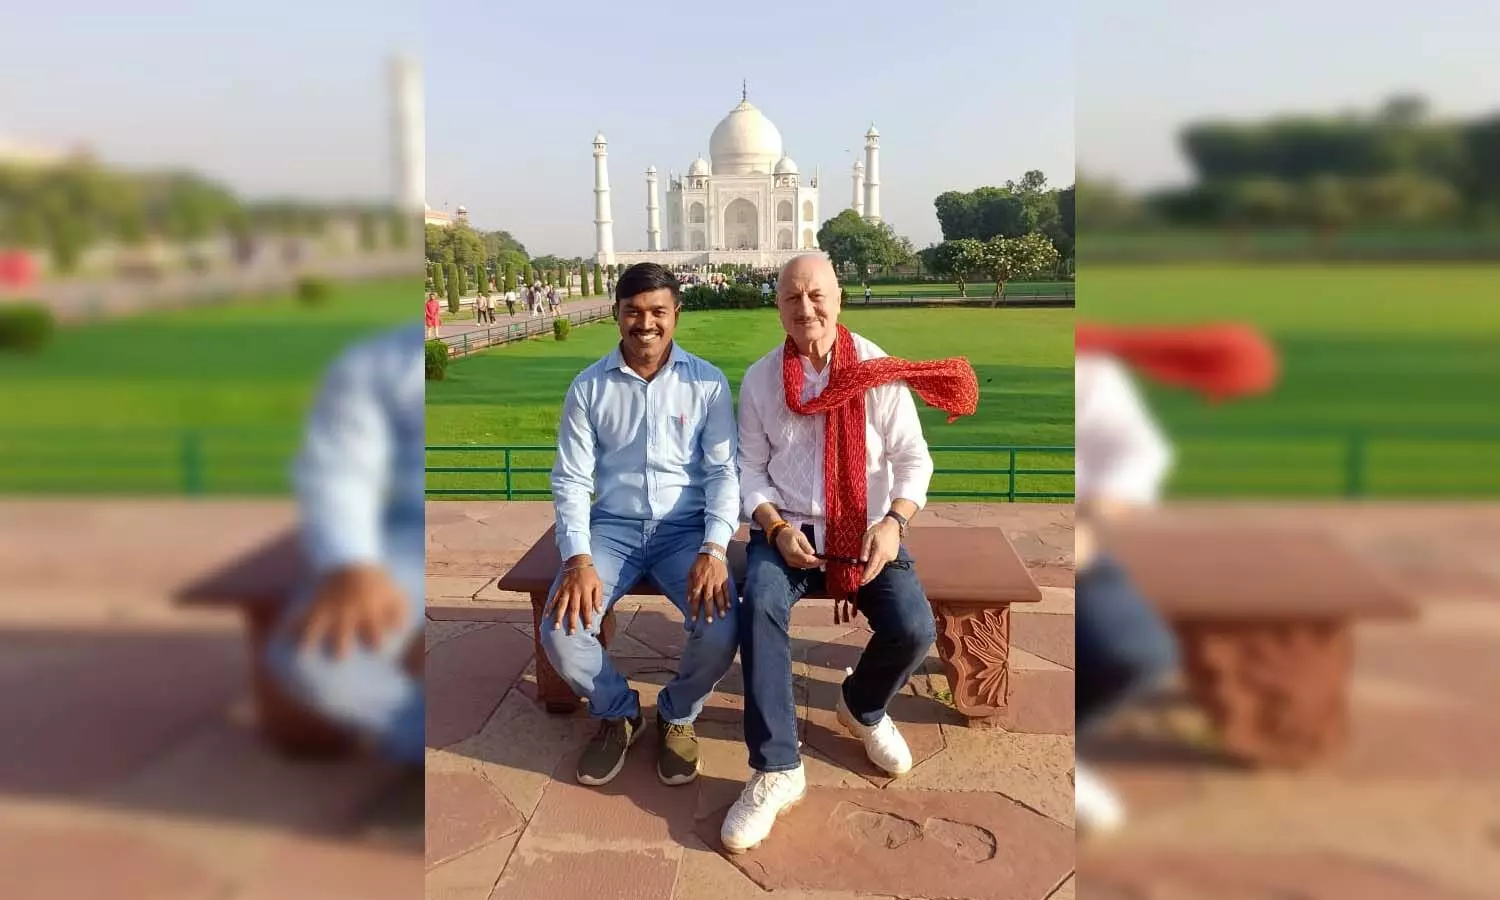 Actor Anupam Kher arrived in Agra for the shooting of his upcoming movie, visited the Taj Mahal